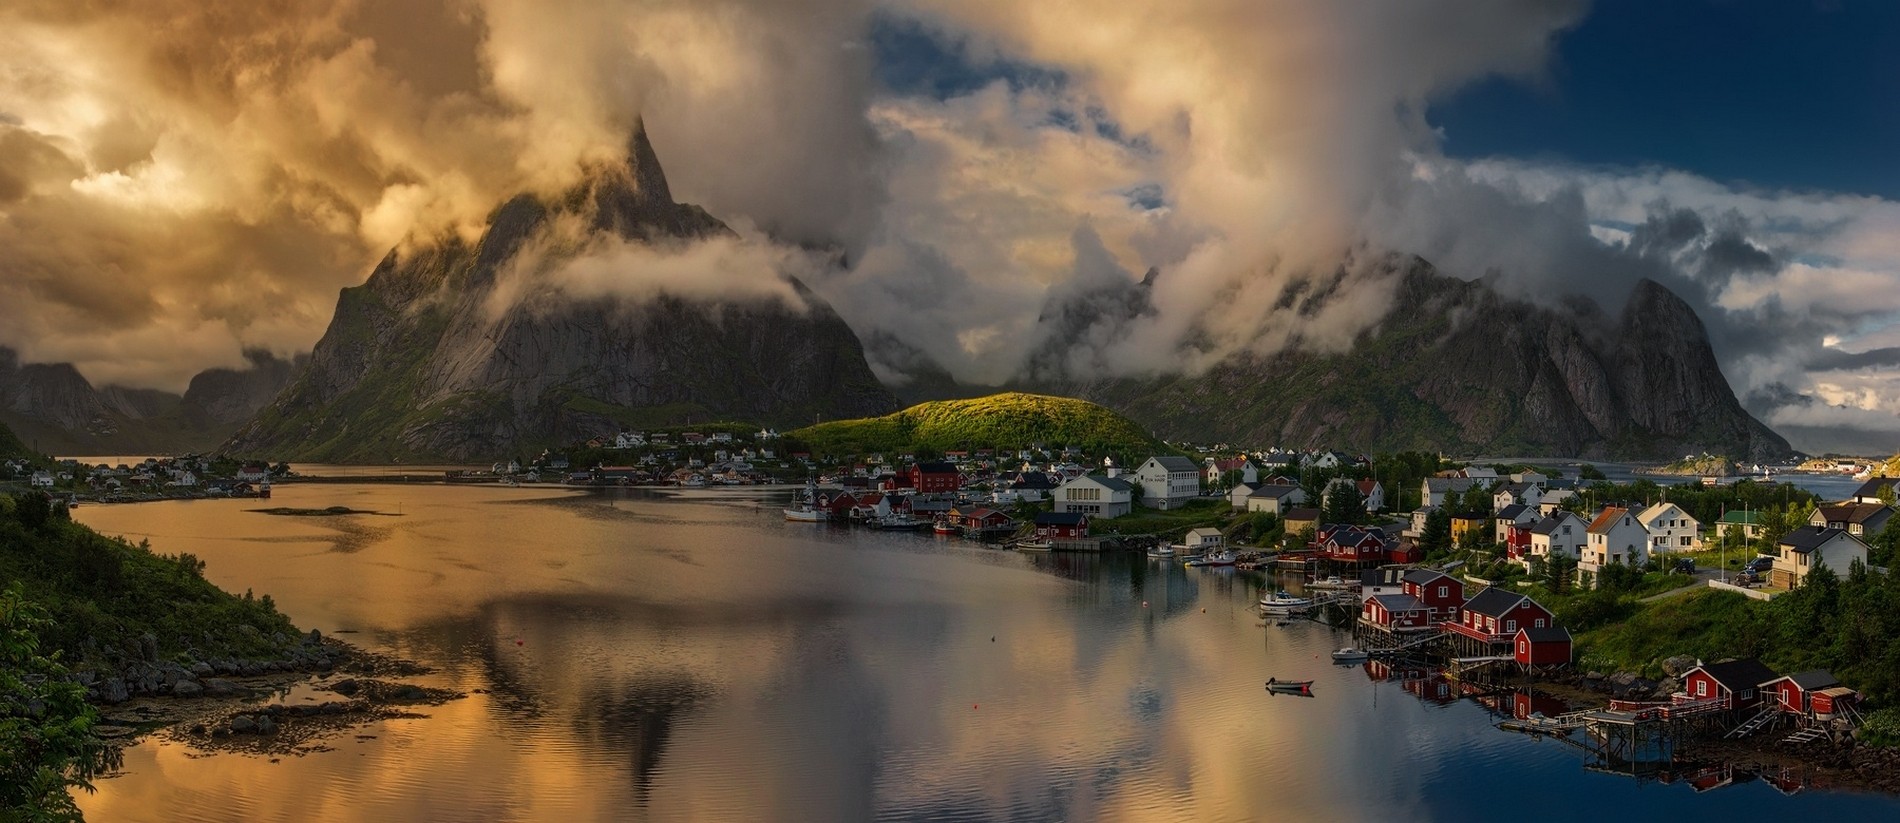 General 1900x823 nature landscape Norway sunset clouds mountains town island Lofoten sea fjord sunlight summer boat nordic landscapes